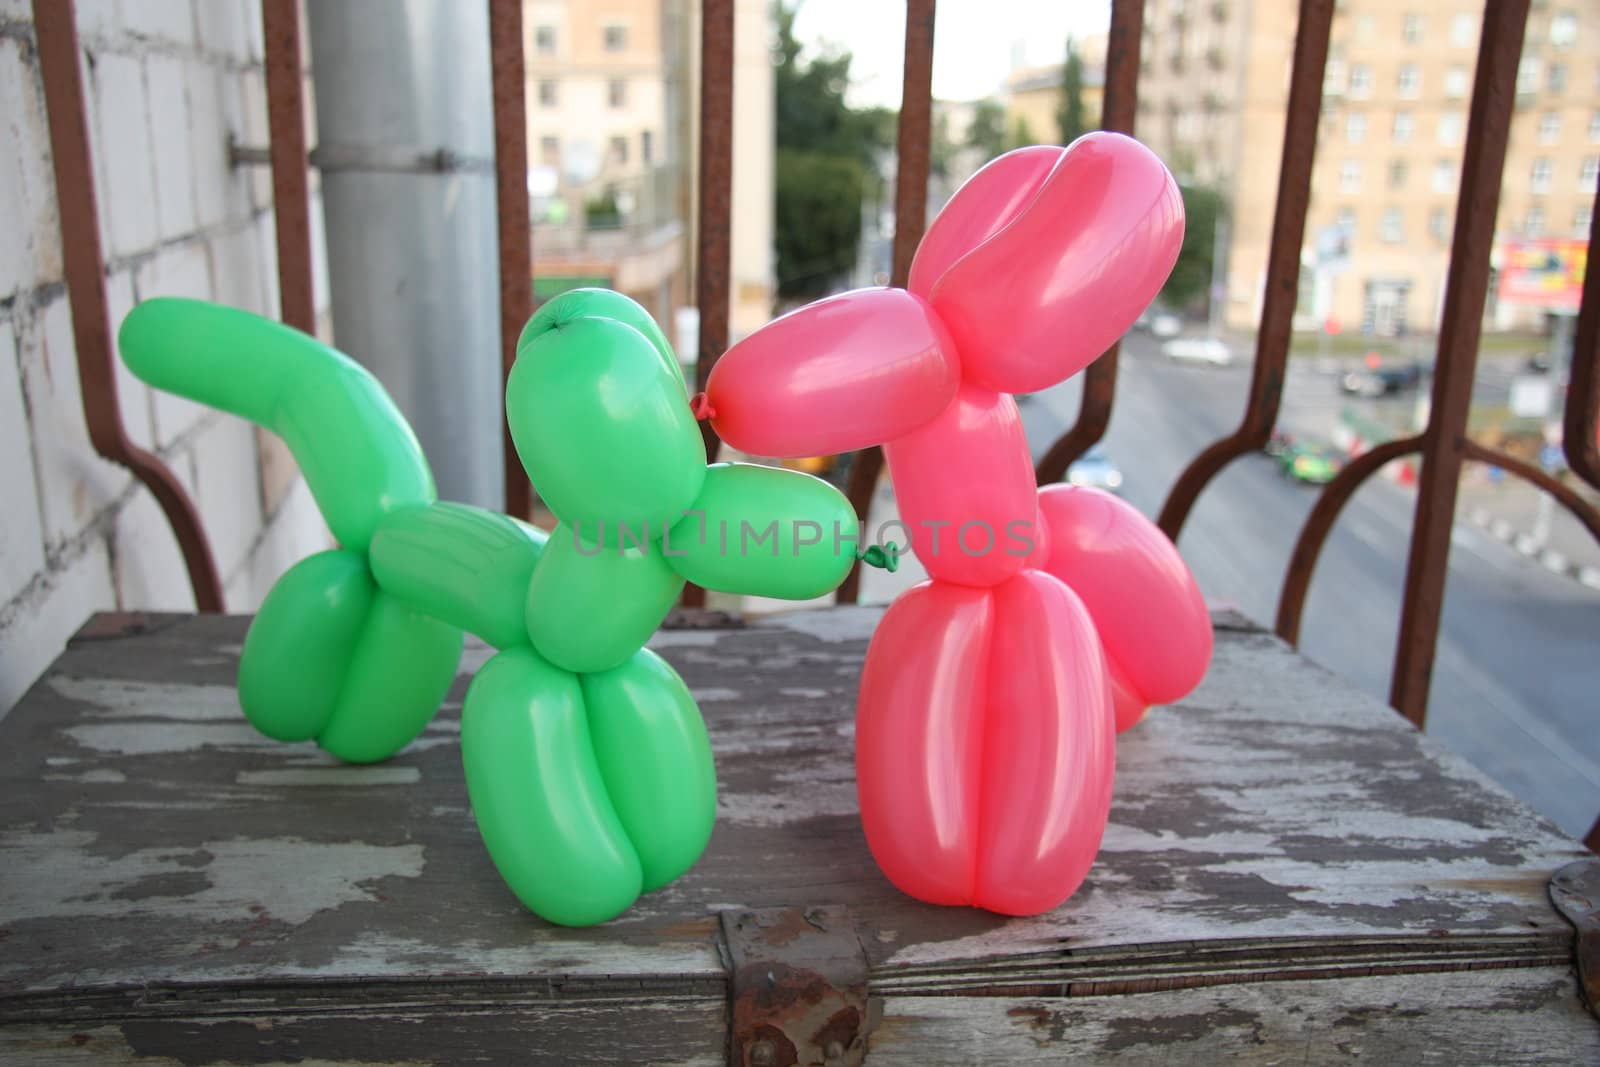 Colorful balloons twisted into two dogs